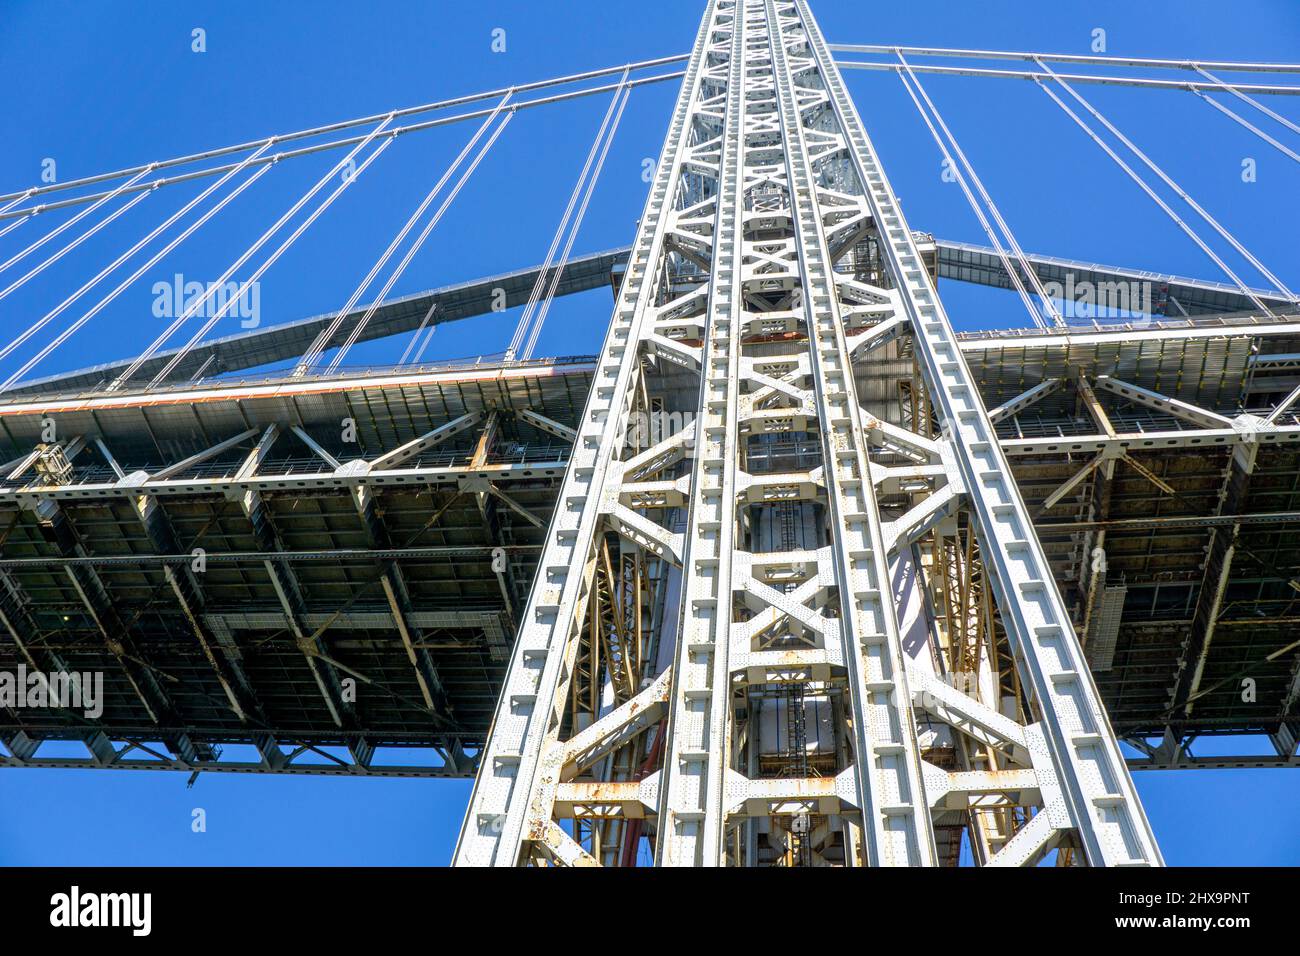 Low Angle View Detail of Suspension Tower, George Washington Bridge, Connecting New York City, New York and Fort Lee, New Jersey, USA Stockfoto